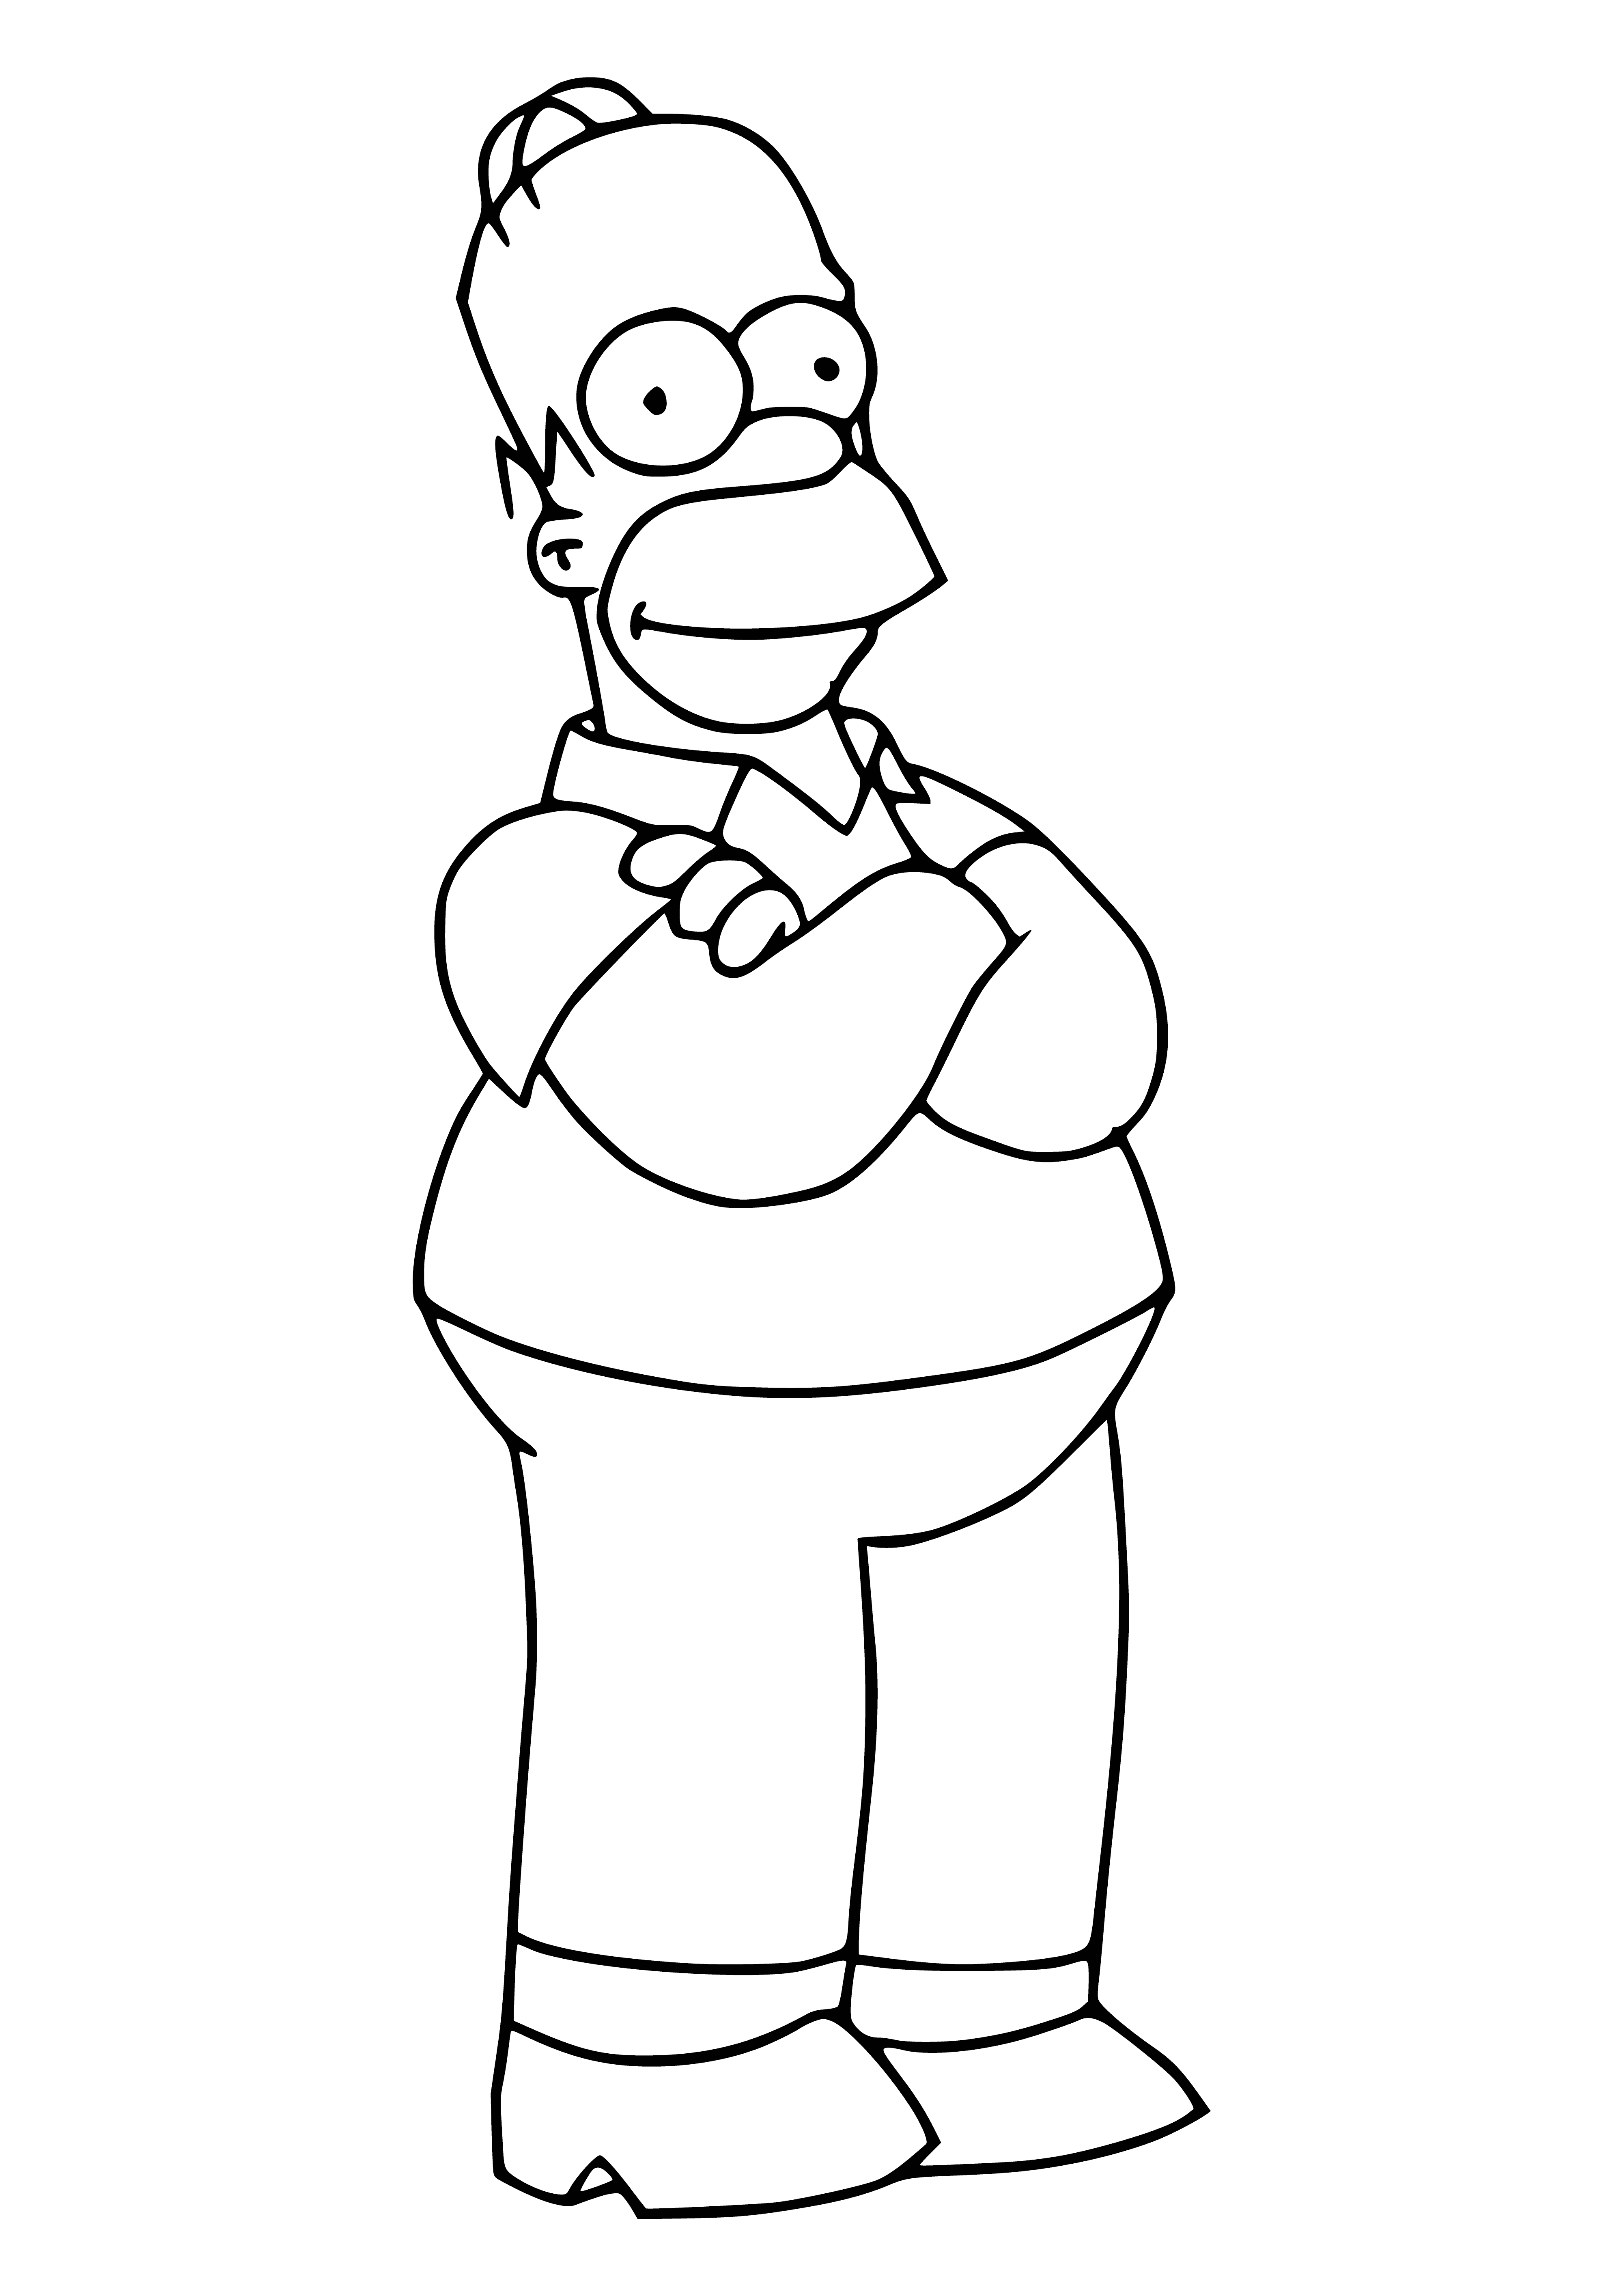 coloring page: Man with yellow skin, bald head, no eyebrows wearing blue shirt & pants, big belly and arms crossed. Big mouth & eyes looking to side. #coloringpage